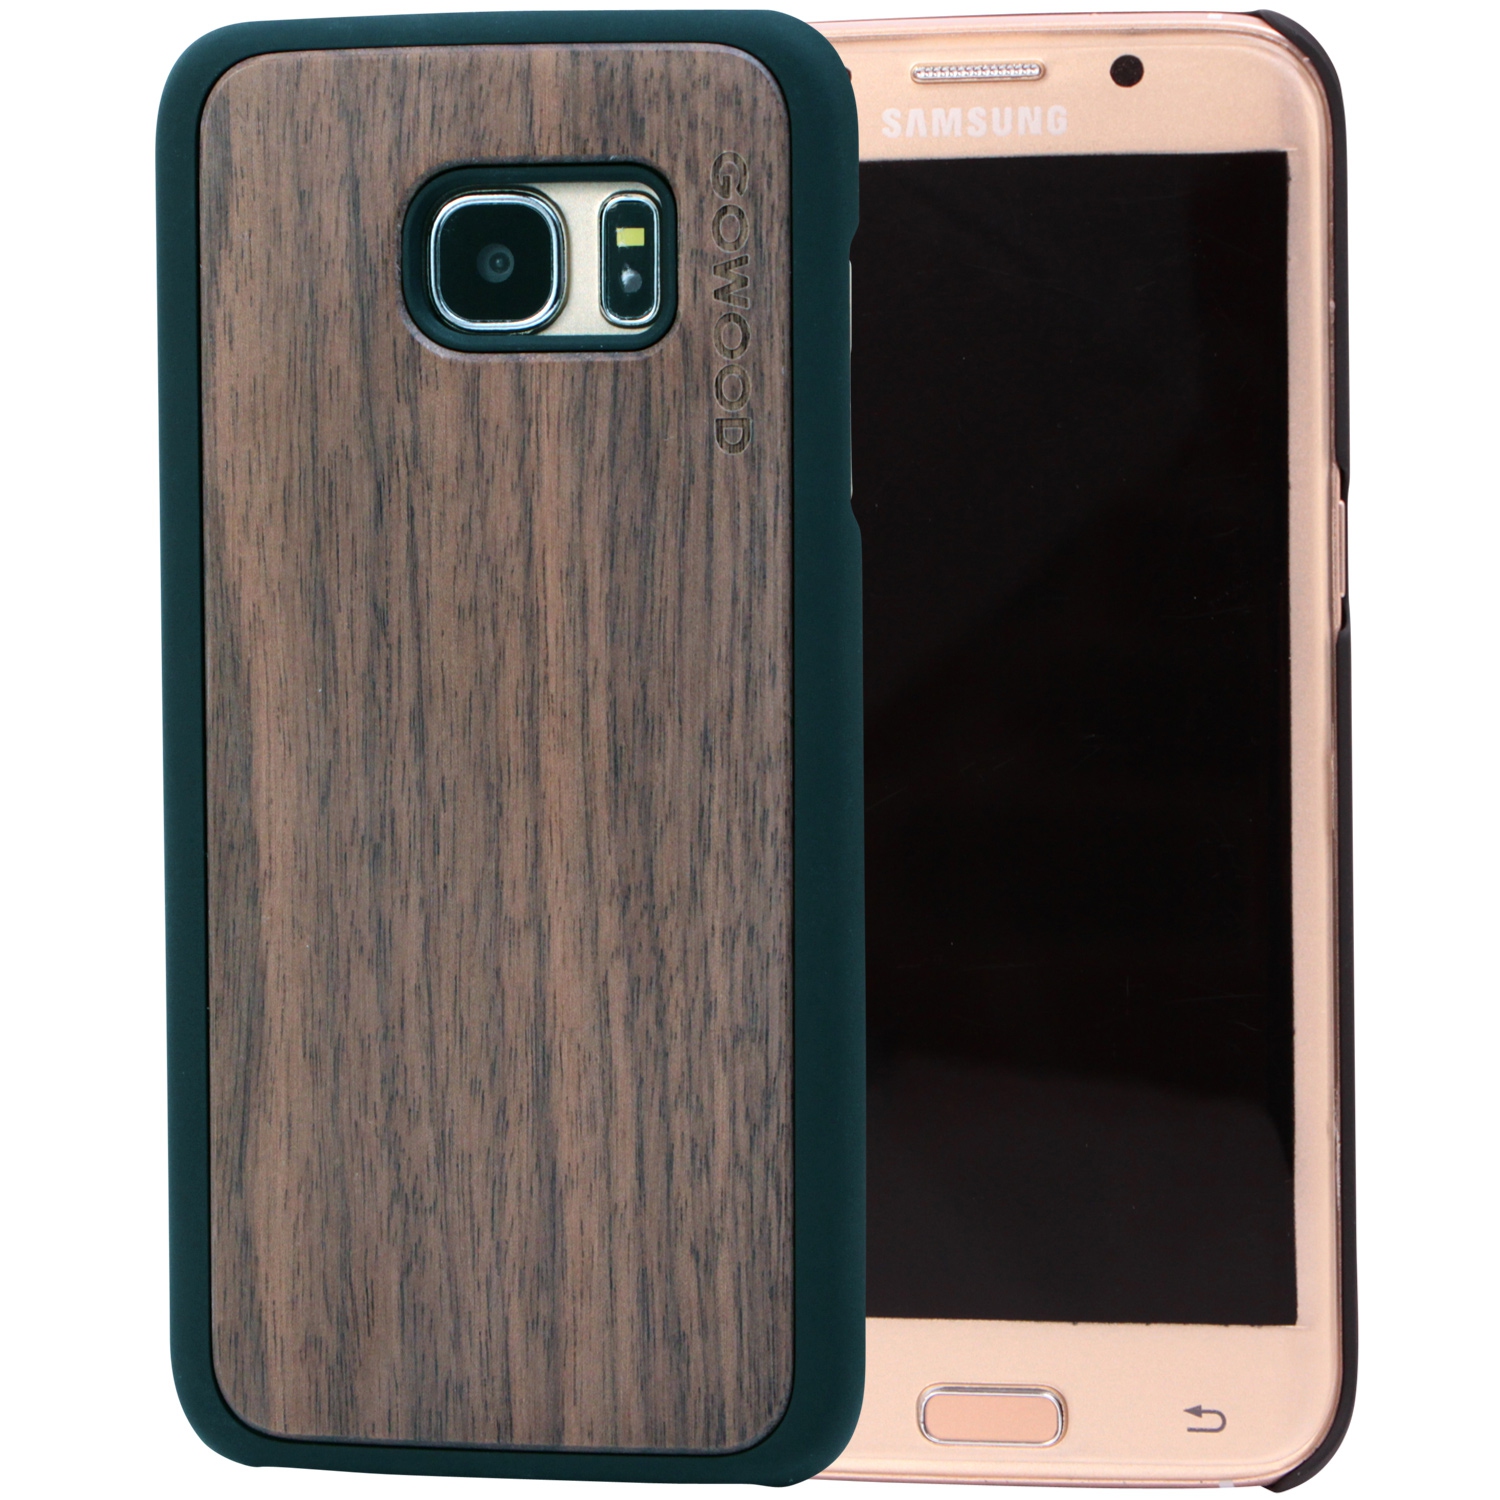 Samsung Galaxy S7 Edge Wood Case | Real Walnut Backside and Durable Polycarbonate Shockproof Bumper with Rubber Coating